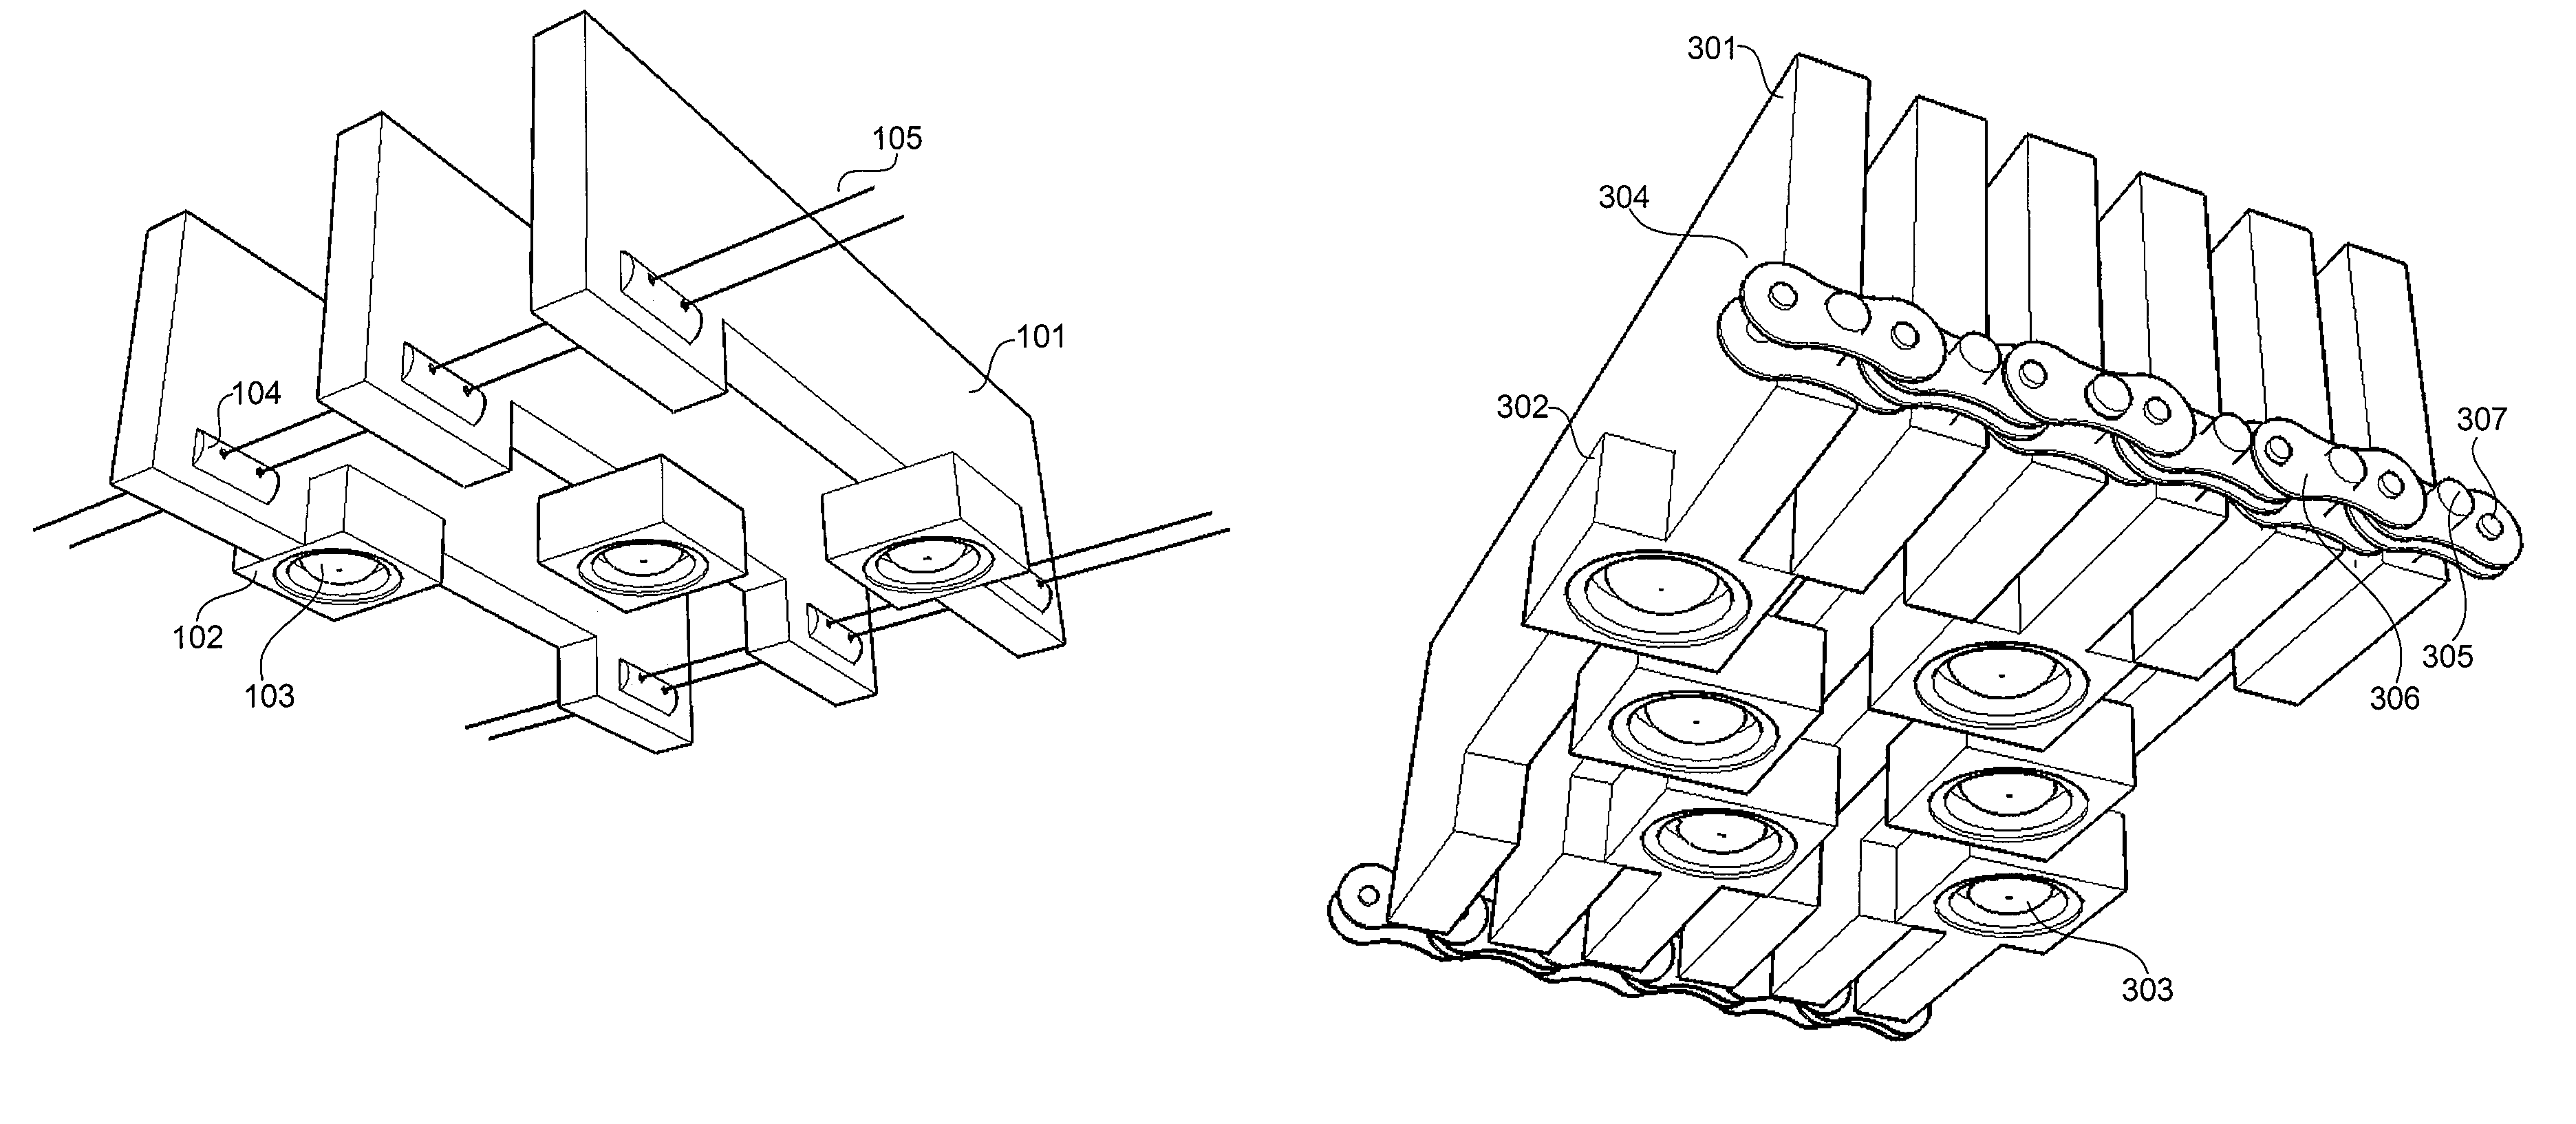 Flexible array probe for the inspection of a contoured surface with varying cross-sectional geometry